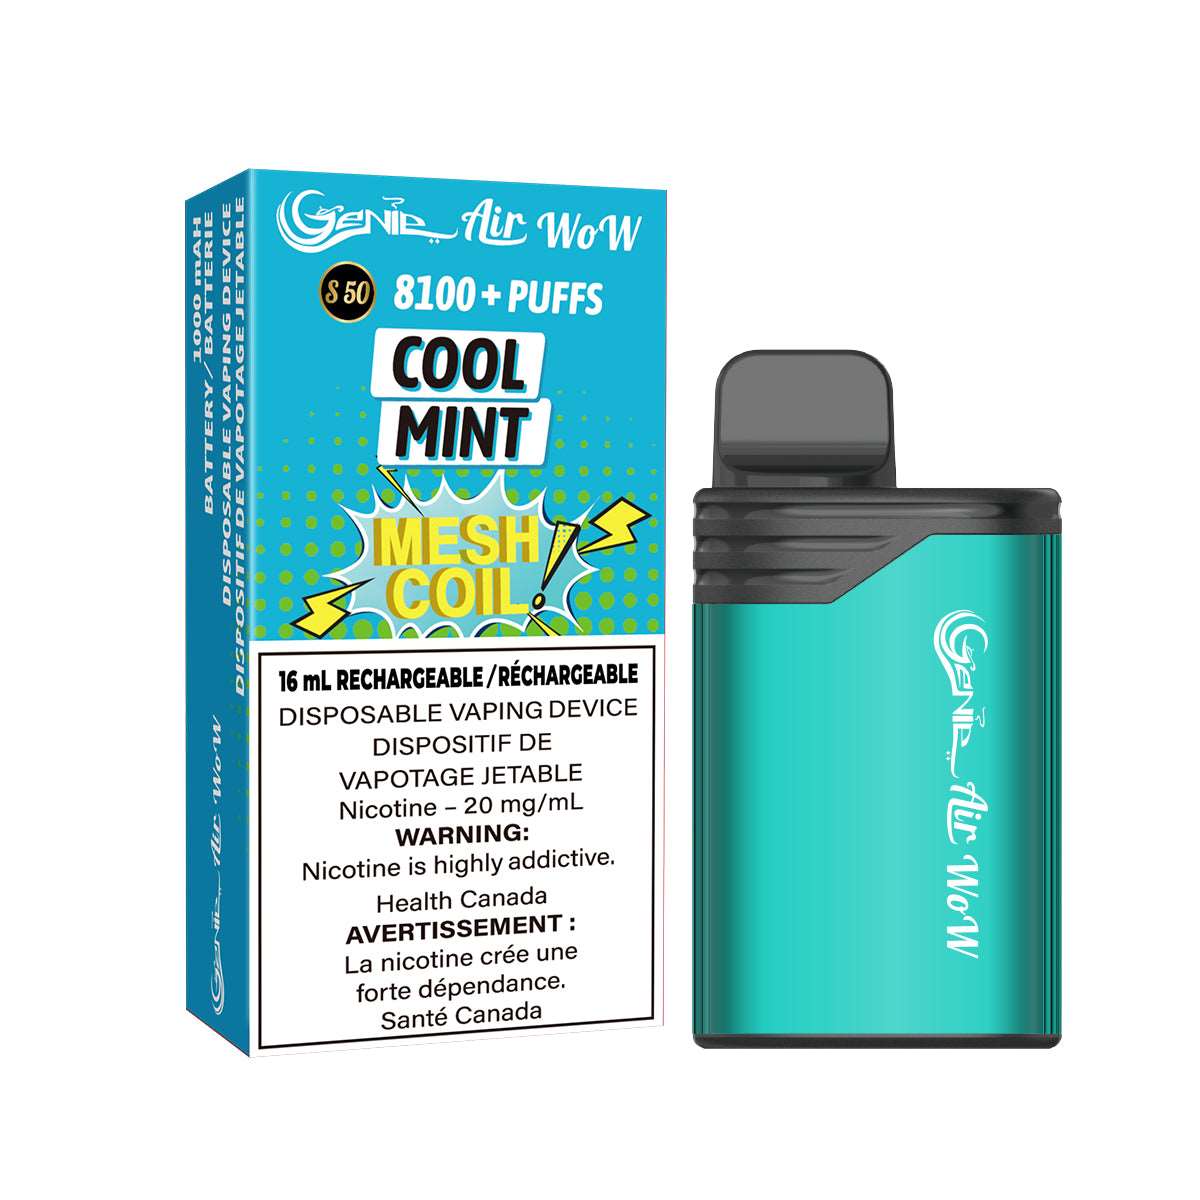 GENIE AIR WOW - COOL MINT 8100 Puffs  20 mg / mL Salt Nicotine  Juice Capacity: 16 mL  Battery: 1000 mAh Rechargeable   Mesh Coil Technology    s50